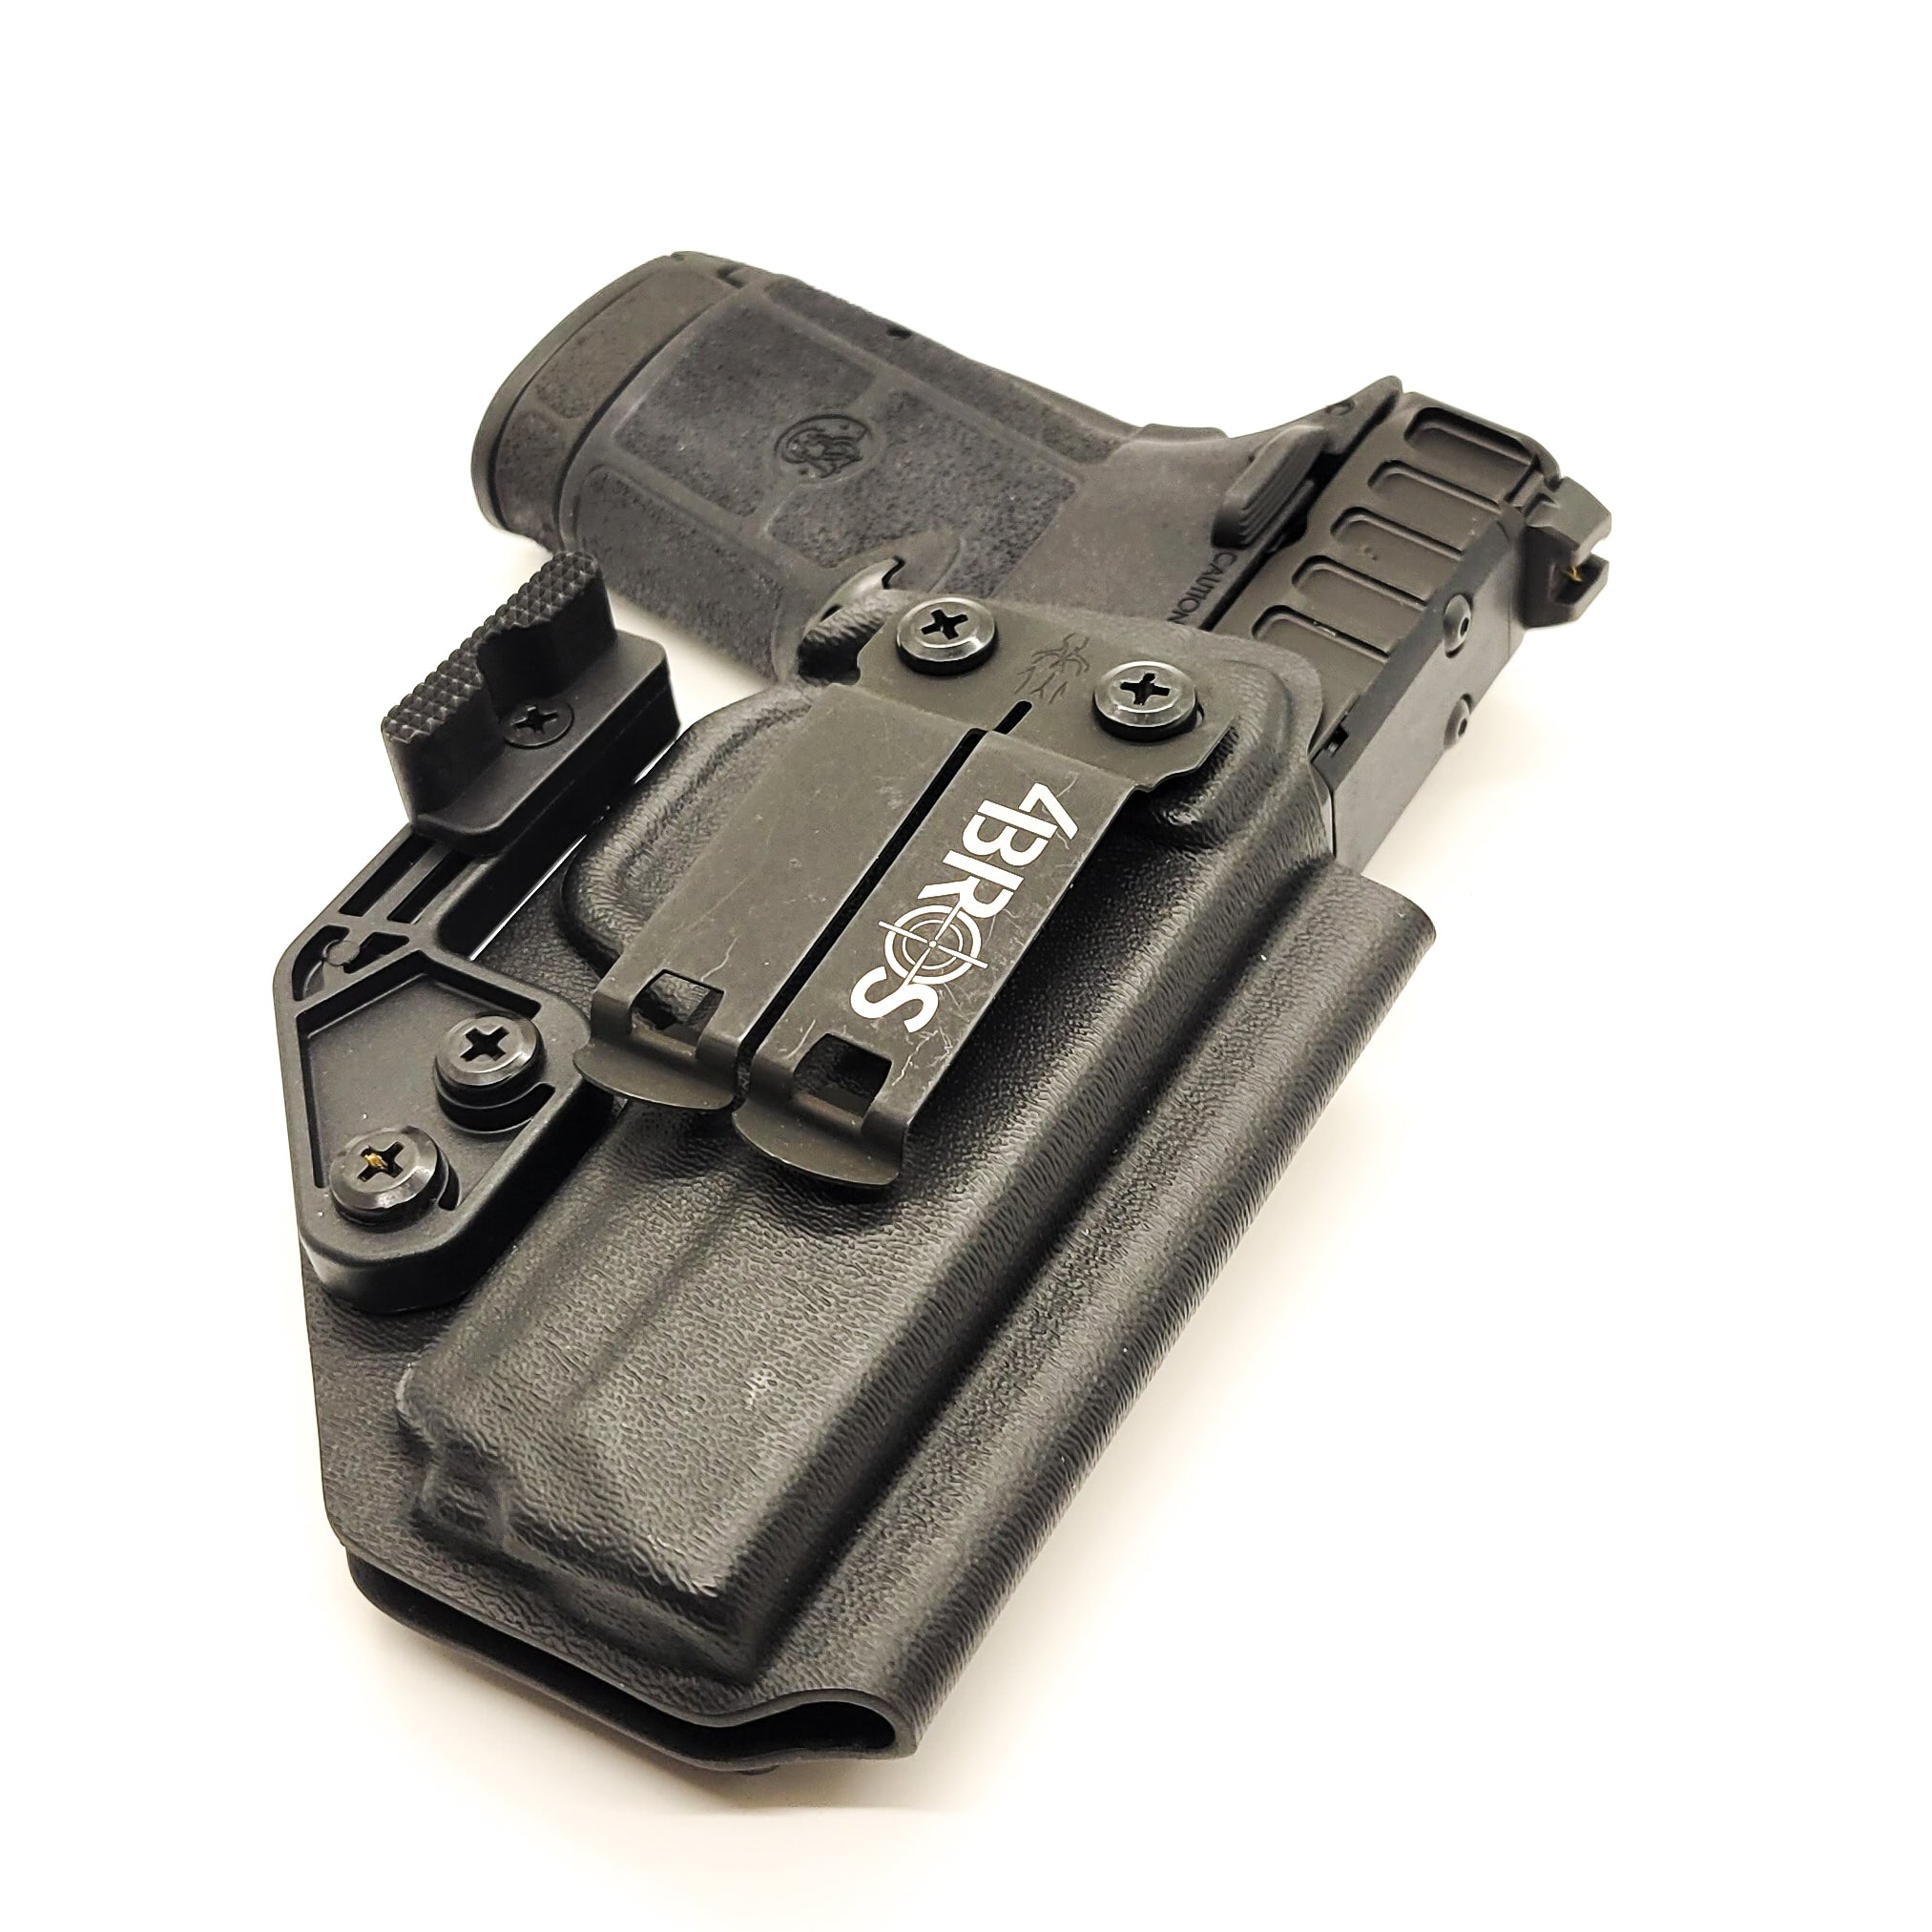 For 2022 best Inside Waistband IWB AIWB Kydex Holster designed to fit the Smith & Wesson EQUALIZER handgun, shop Four Brothers Holsters. Full sweat guard, adjustable retention, minimal material, and smooth edges to reduce printing. Profiled to clear red dot sights and optics. Proudly made in the USA.